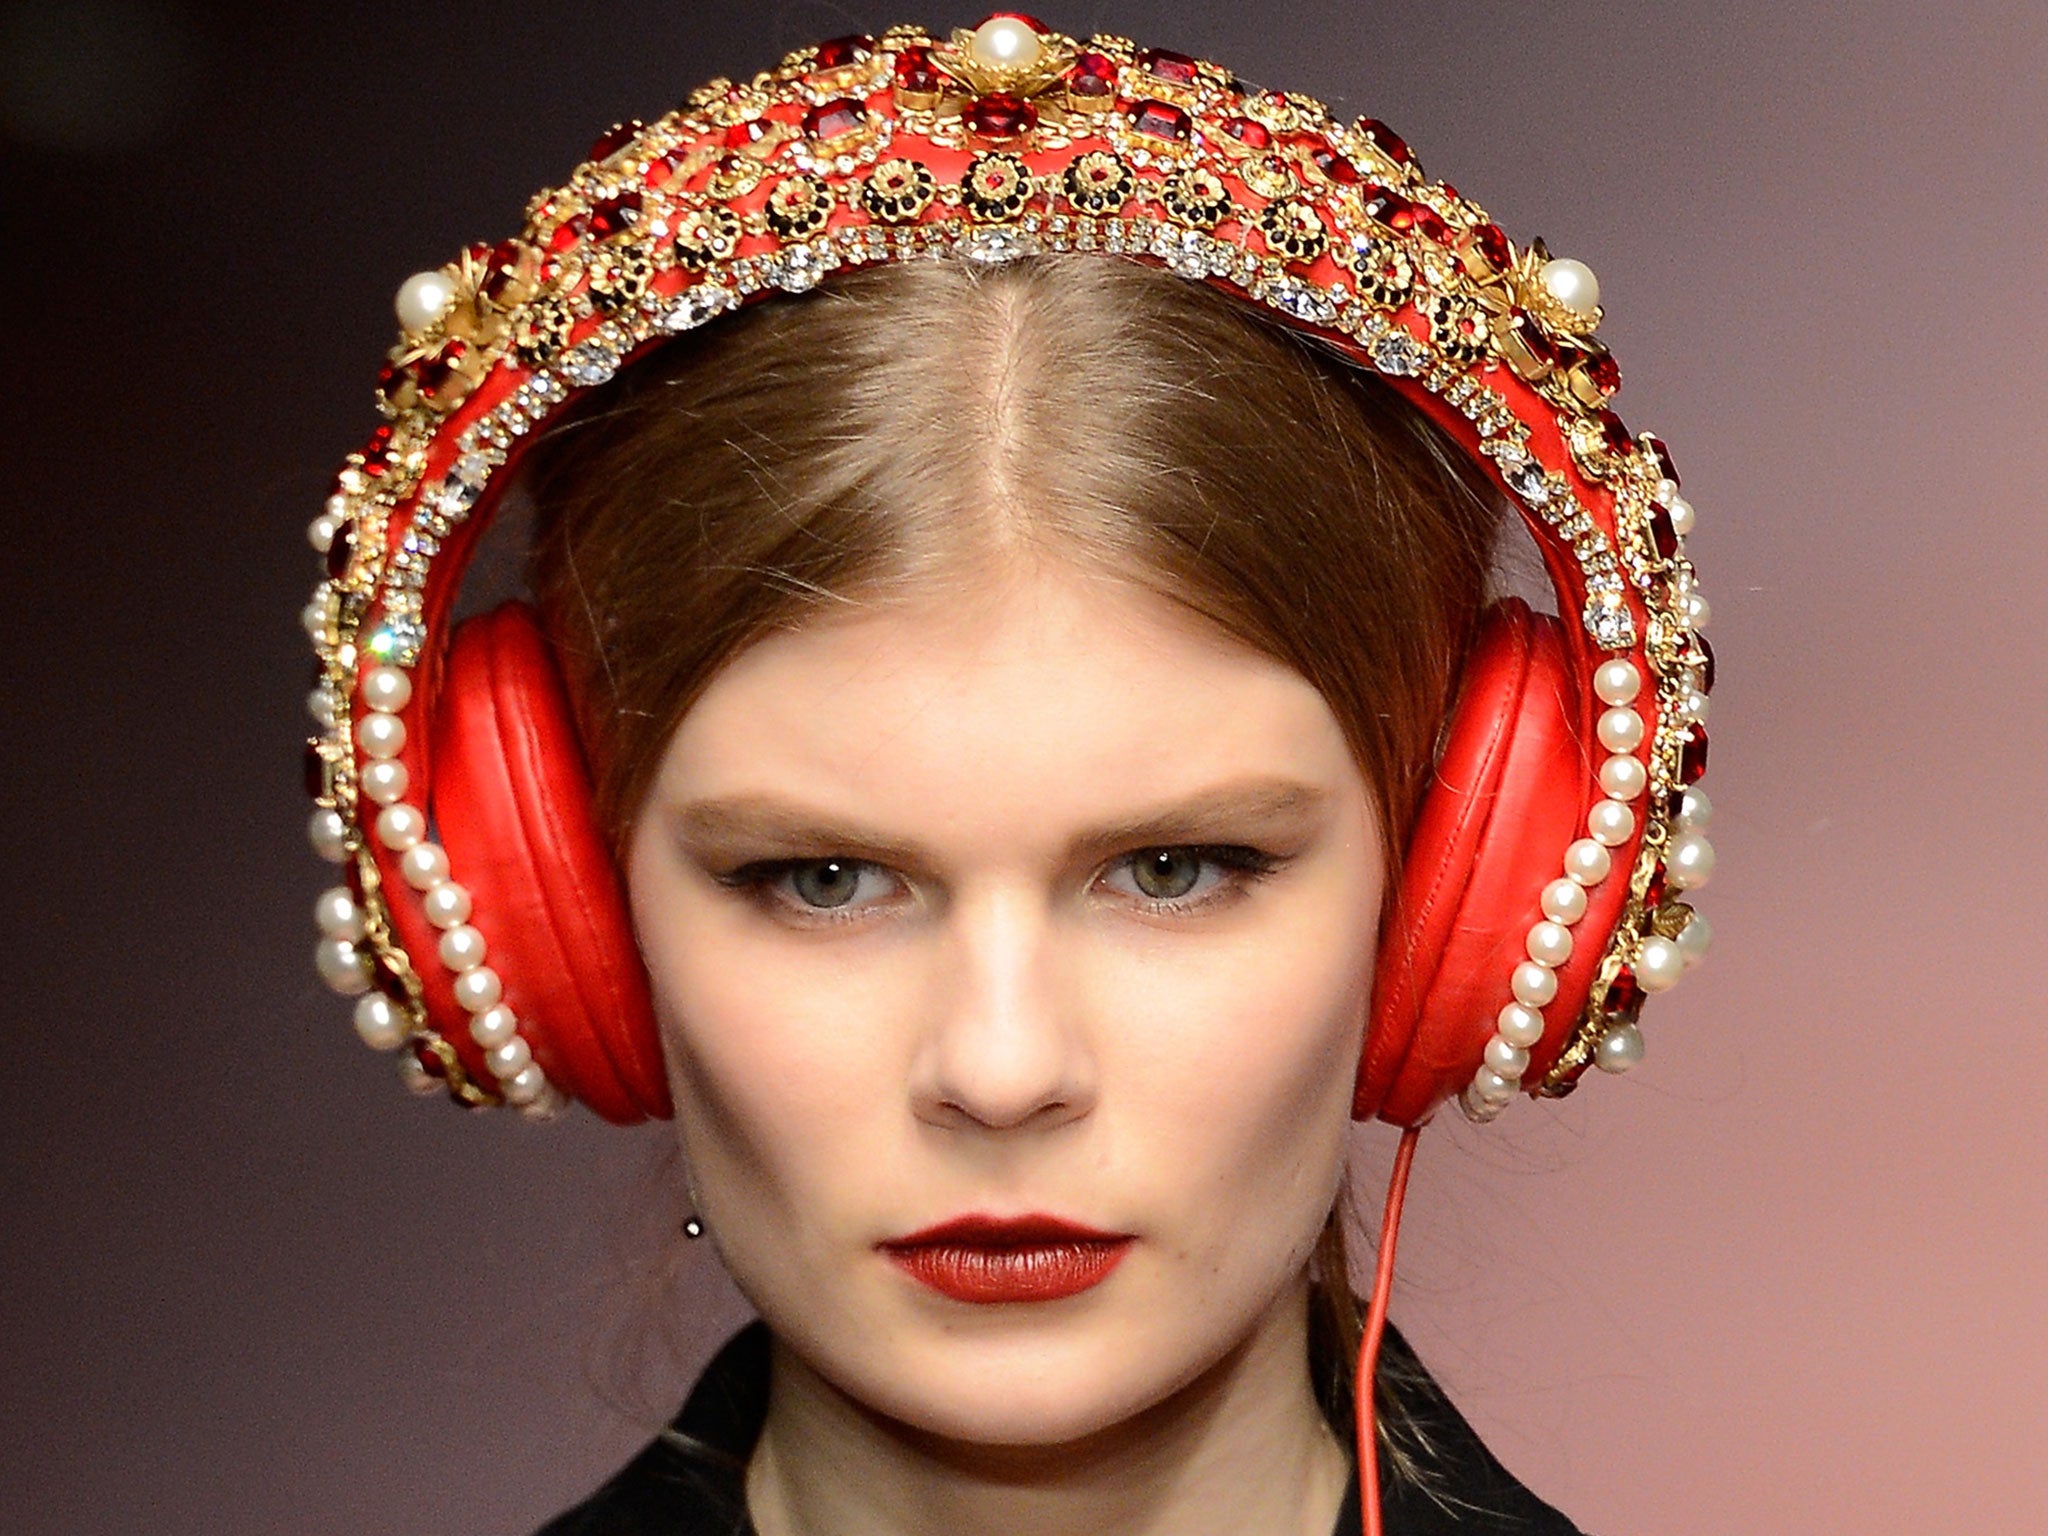 Dolce & Gabbana’s embellished headphones can be yours for $7,000 | The ...